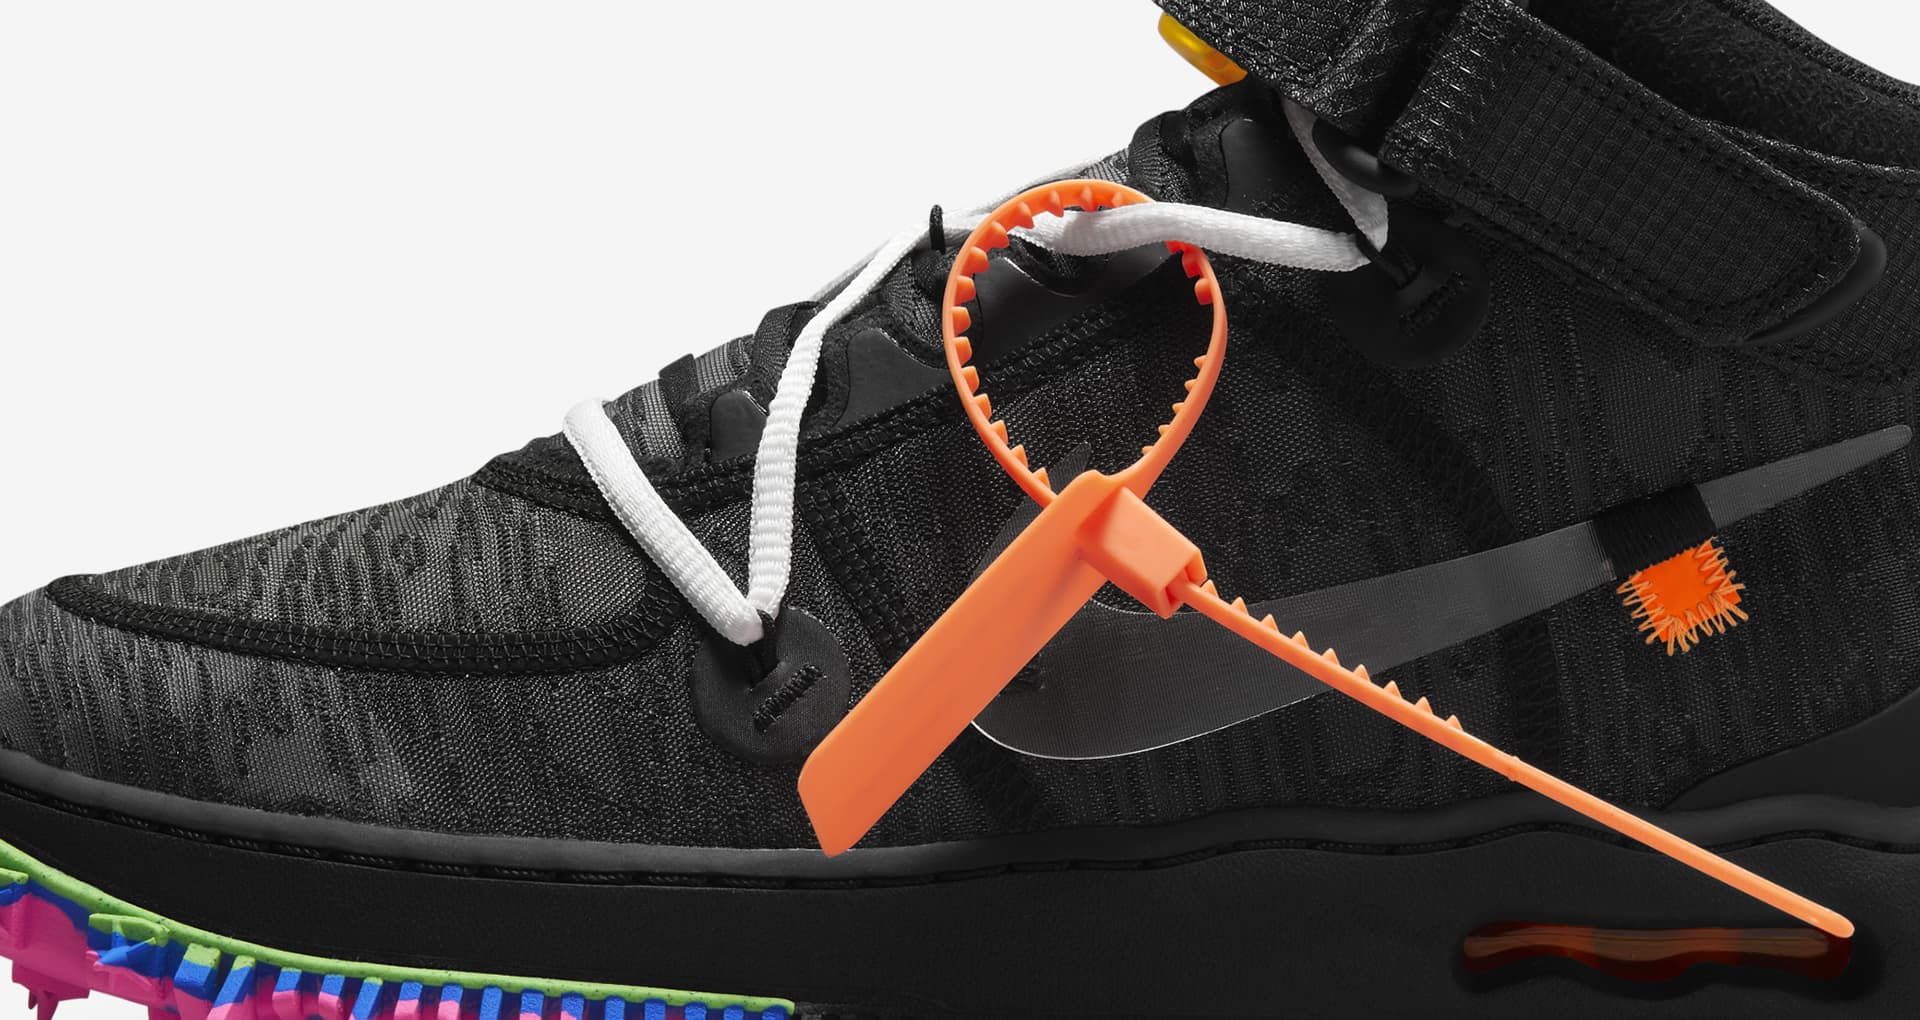 Off-white: Off-White x Nike Air Force 1 Mid “Grim Reaper Canary